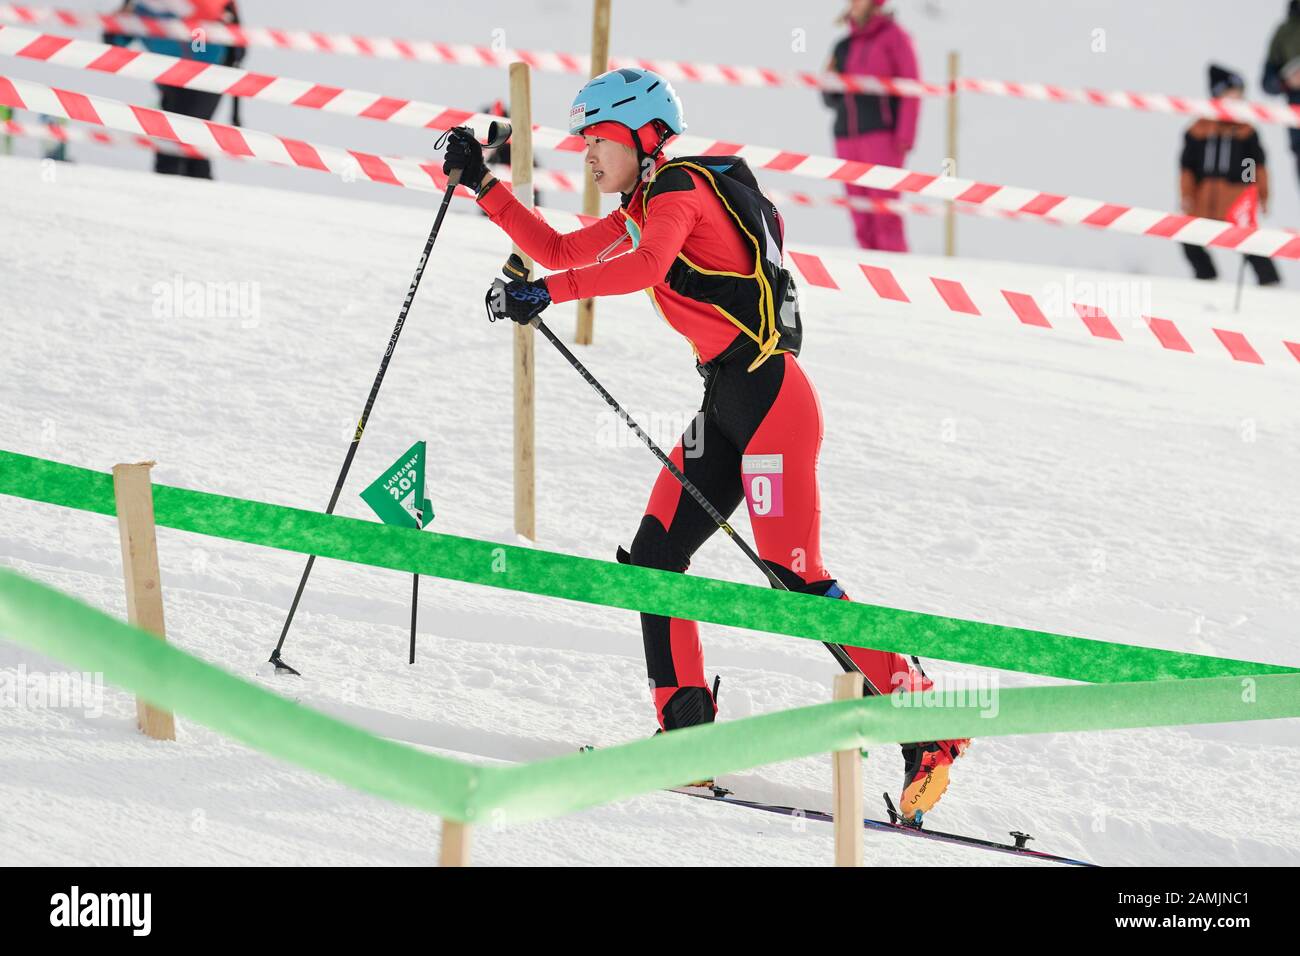 Villars. 13th Jan, 2020. Yu Jingxuan of China competes during the women's sprint of ski mountaineering at the 3rd Winter Youth Olympic Games at Villars Winter Park in Villars, Switzerland on Jan. 13, 2020. Credit: Chen Yichen/Xinhua/Alamy Live News Stock Photo